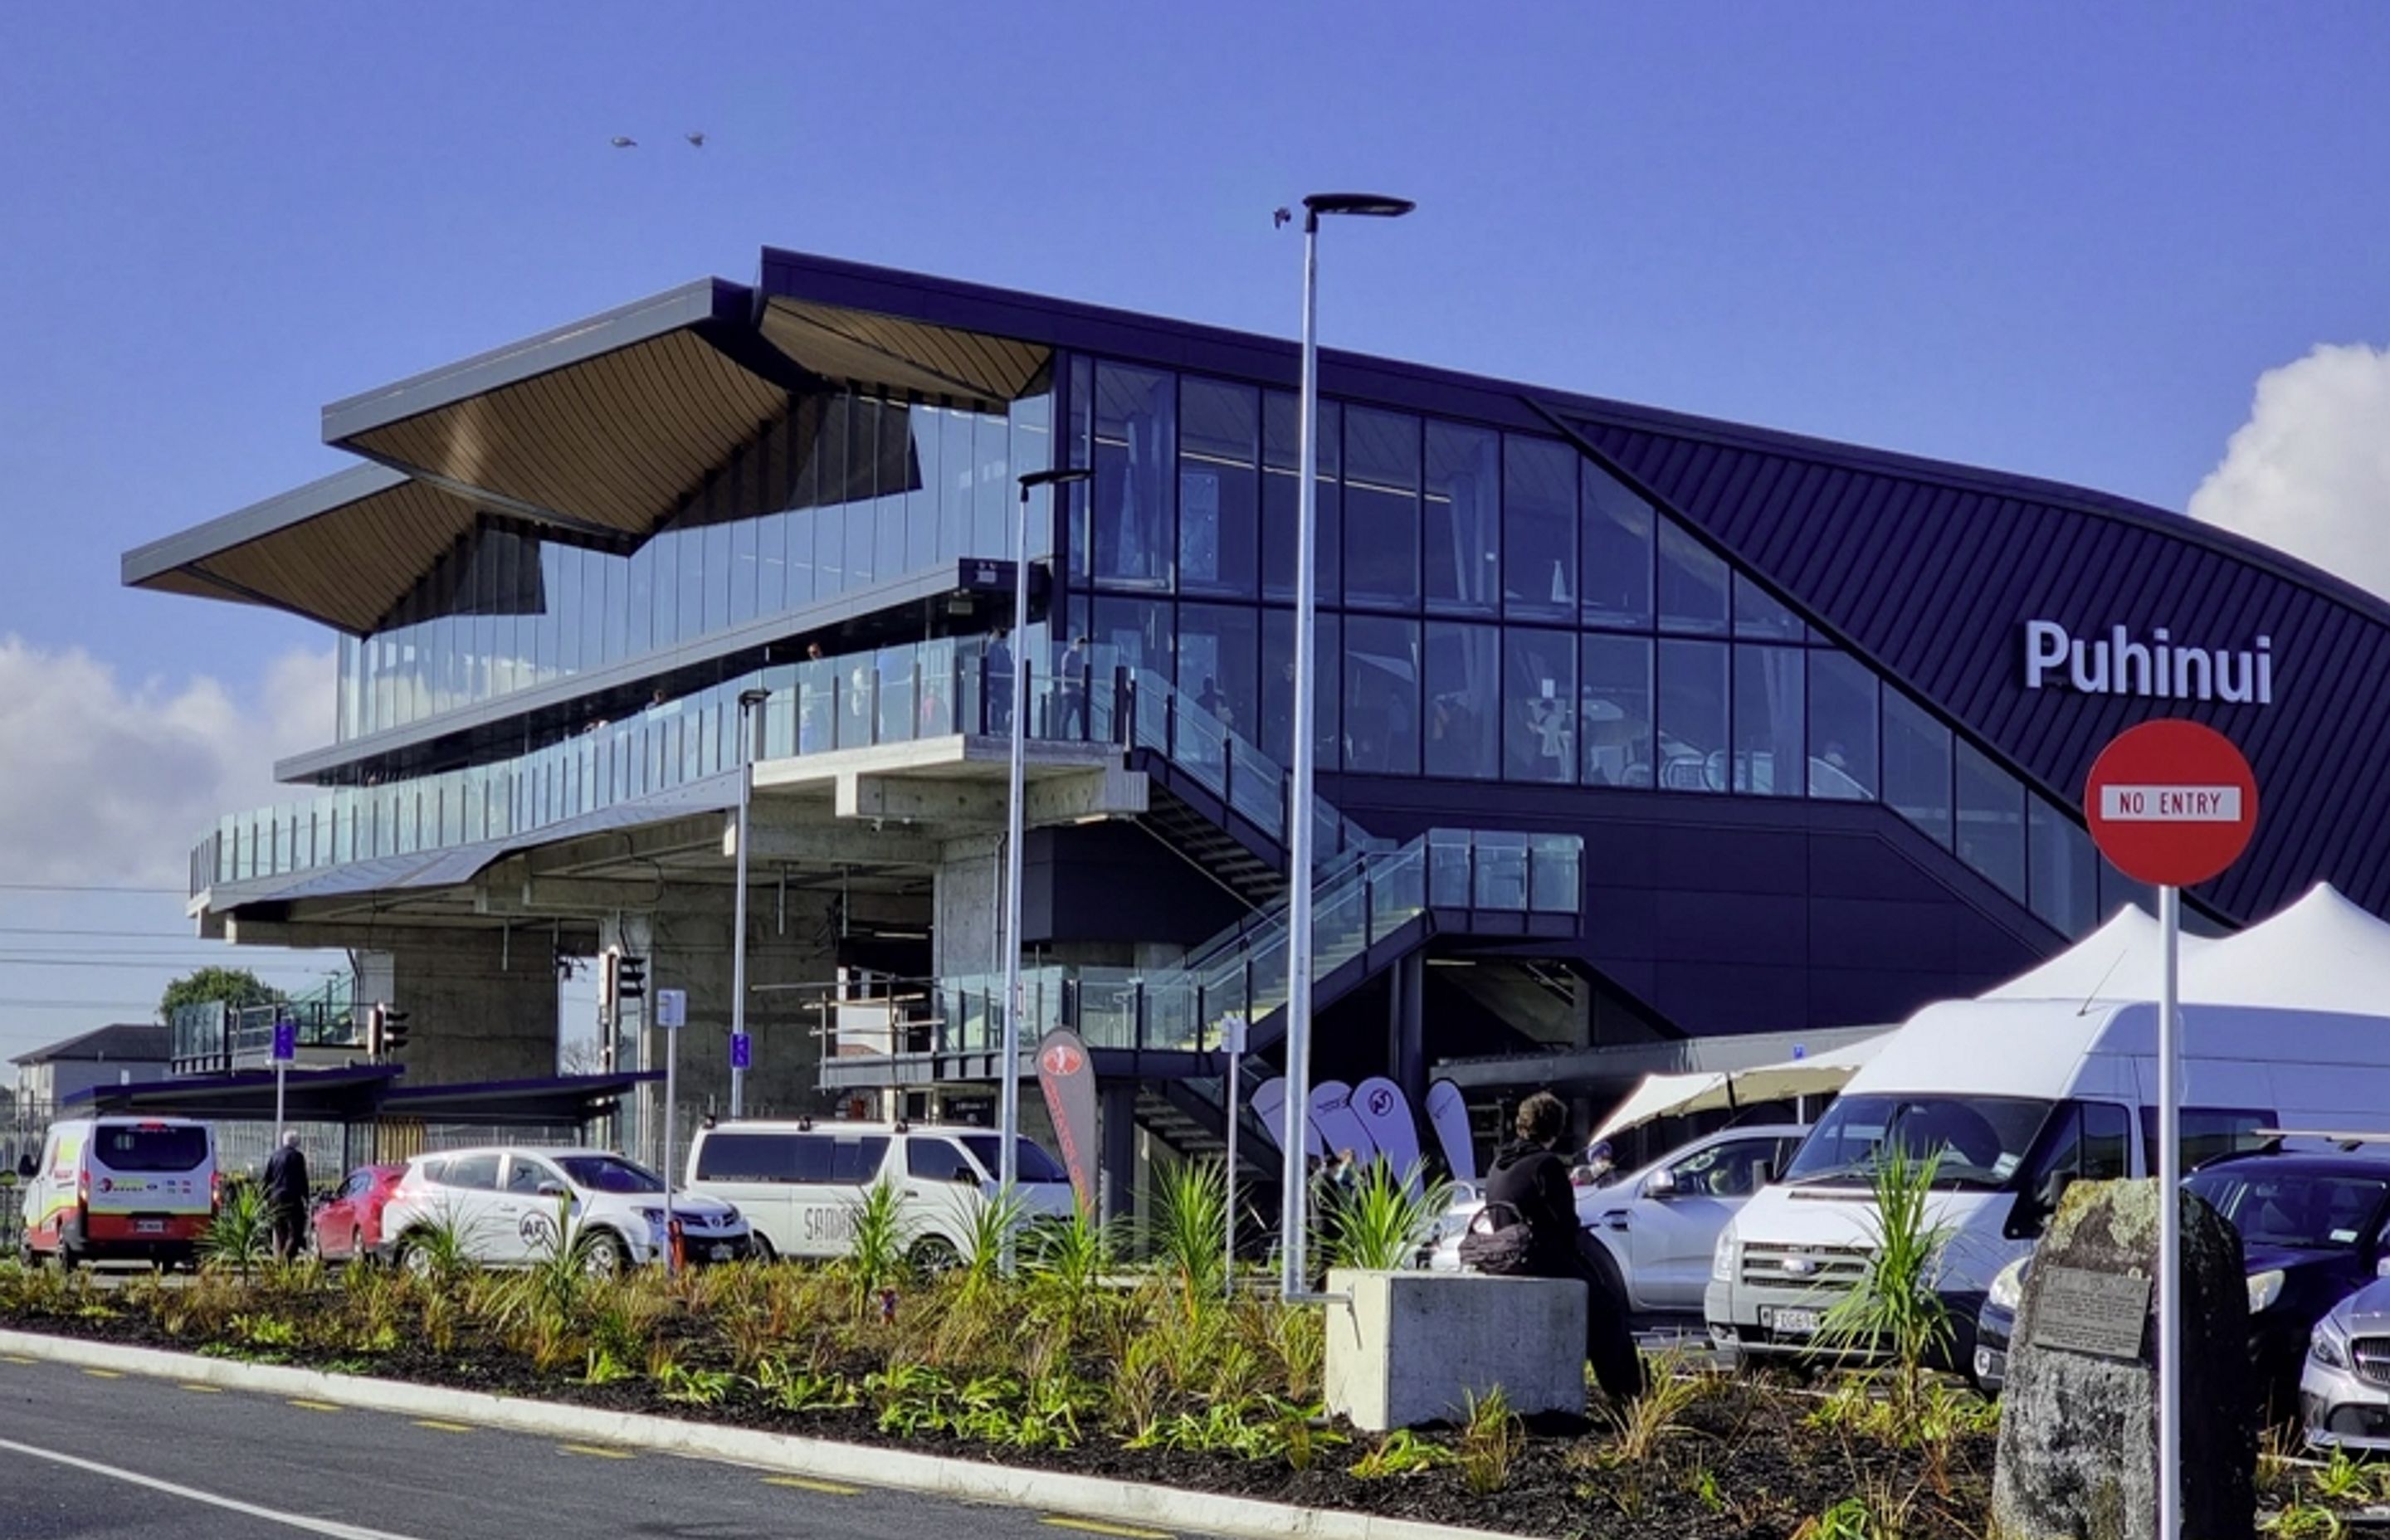 Key to the $69m refurbishment and upgrade of the Puhinui interchange was creating a premium passenger experience. This has been achieved through the contemporary design, an easy and intuitive layout and the use of high-quality architectural finishes.